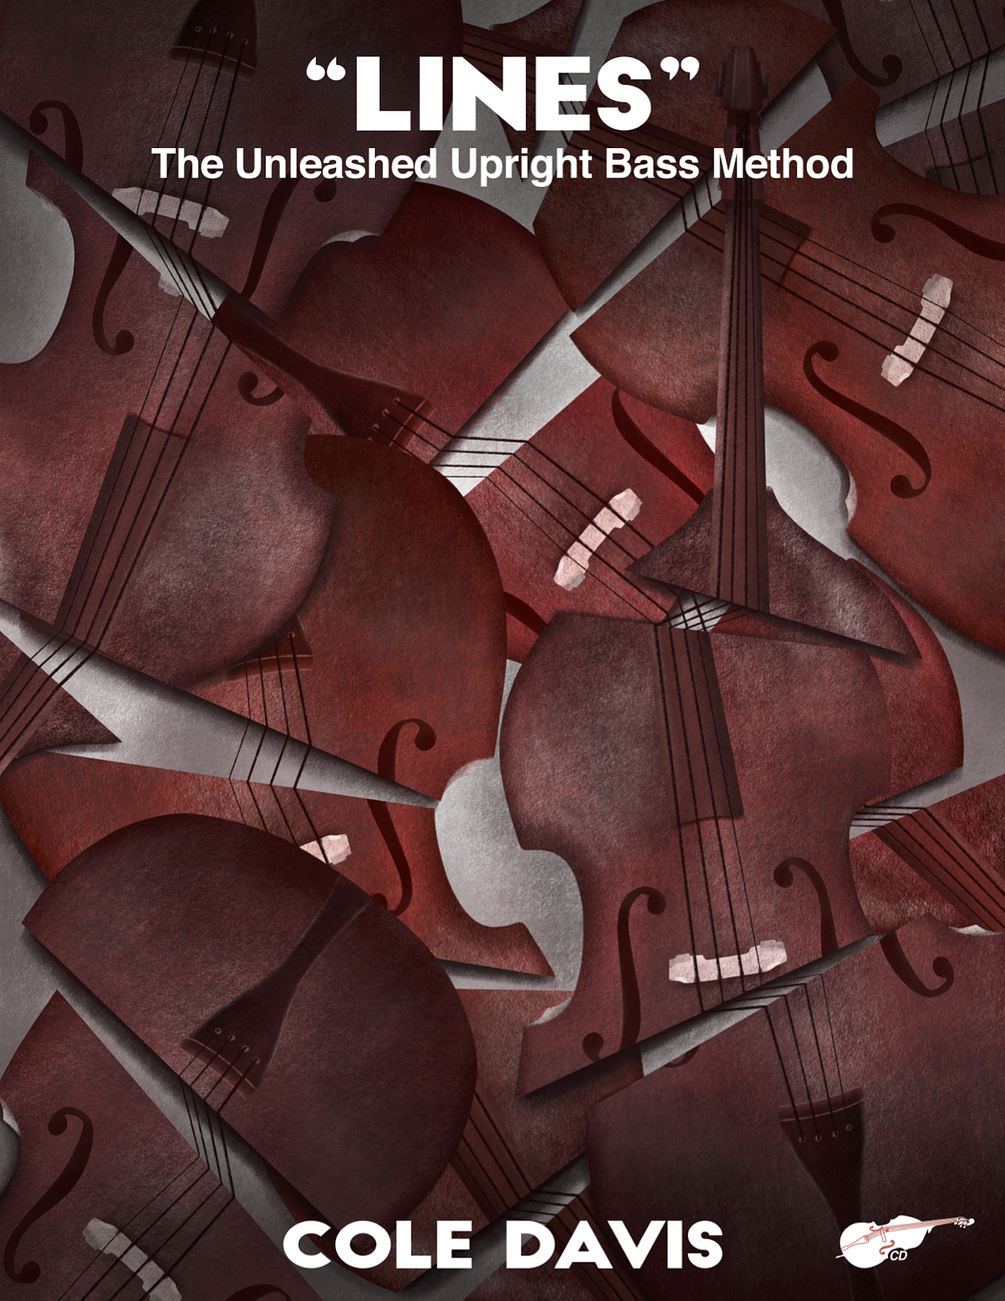 Cole Davis: "LINES" The Unleashed Upright Bass Method